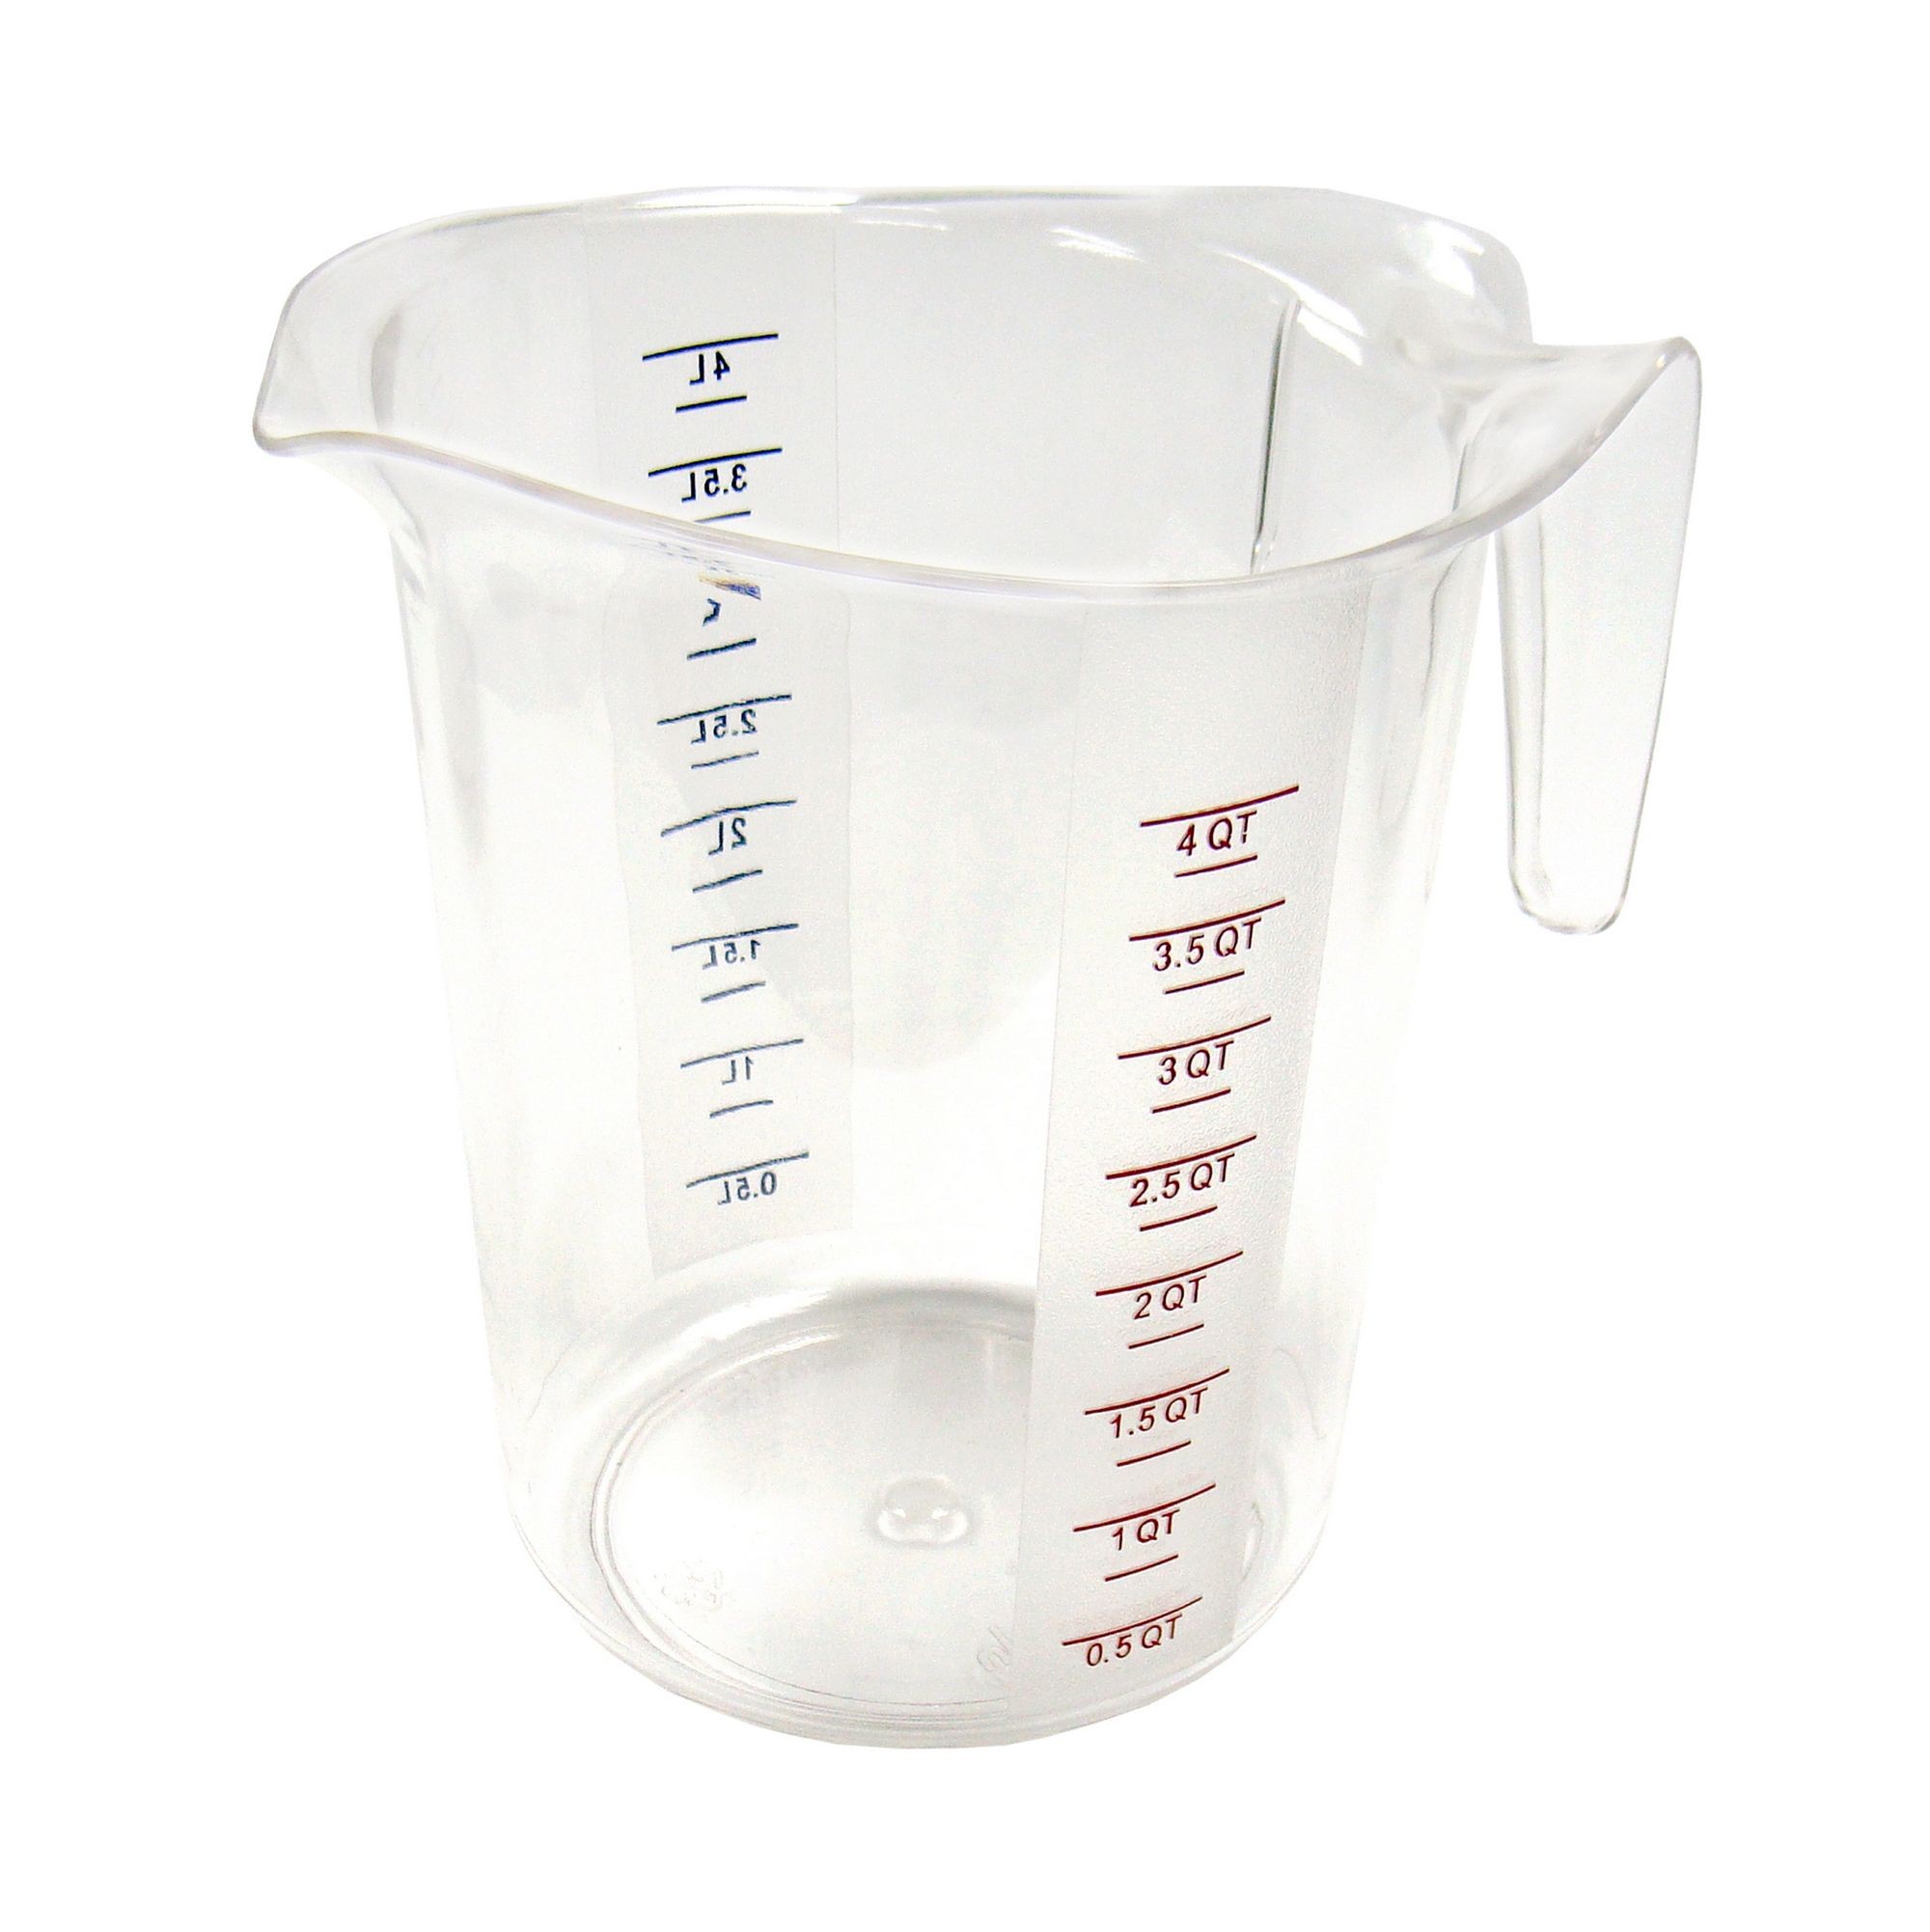 Tablecraft (724C) 1/2 Cup Stainless Steel Measuring Cup